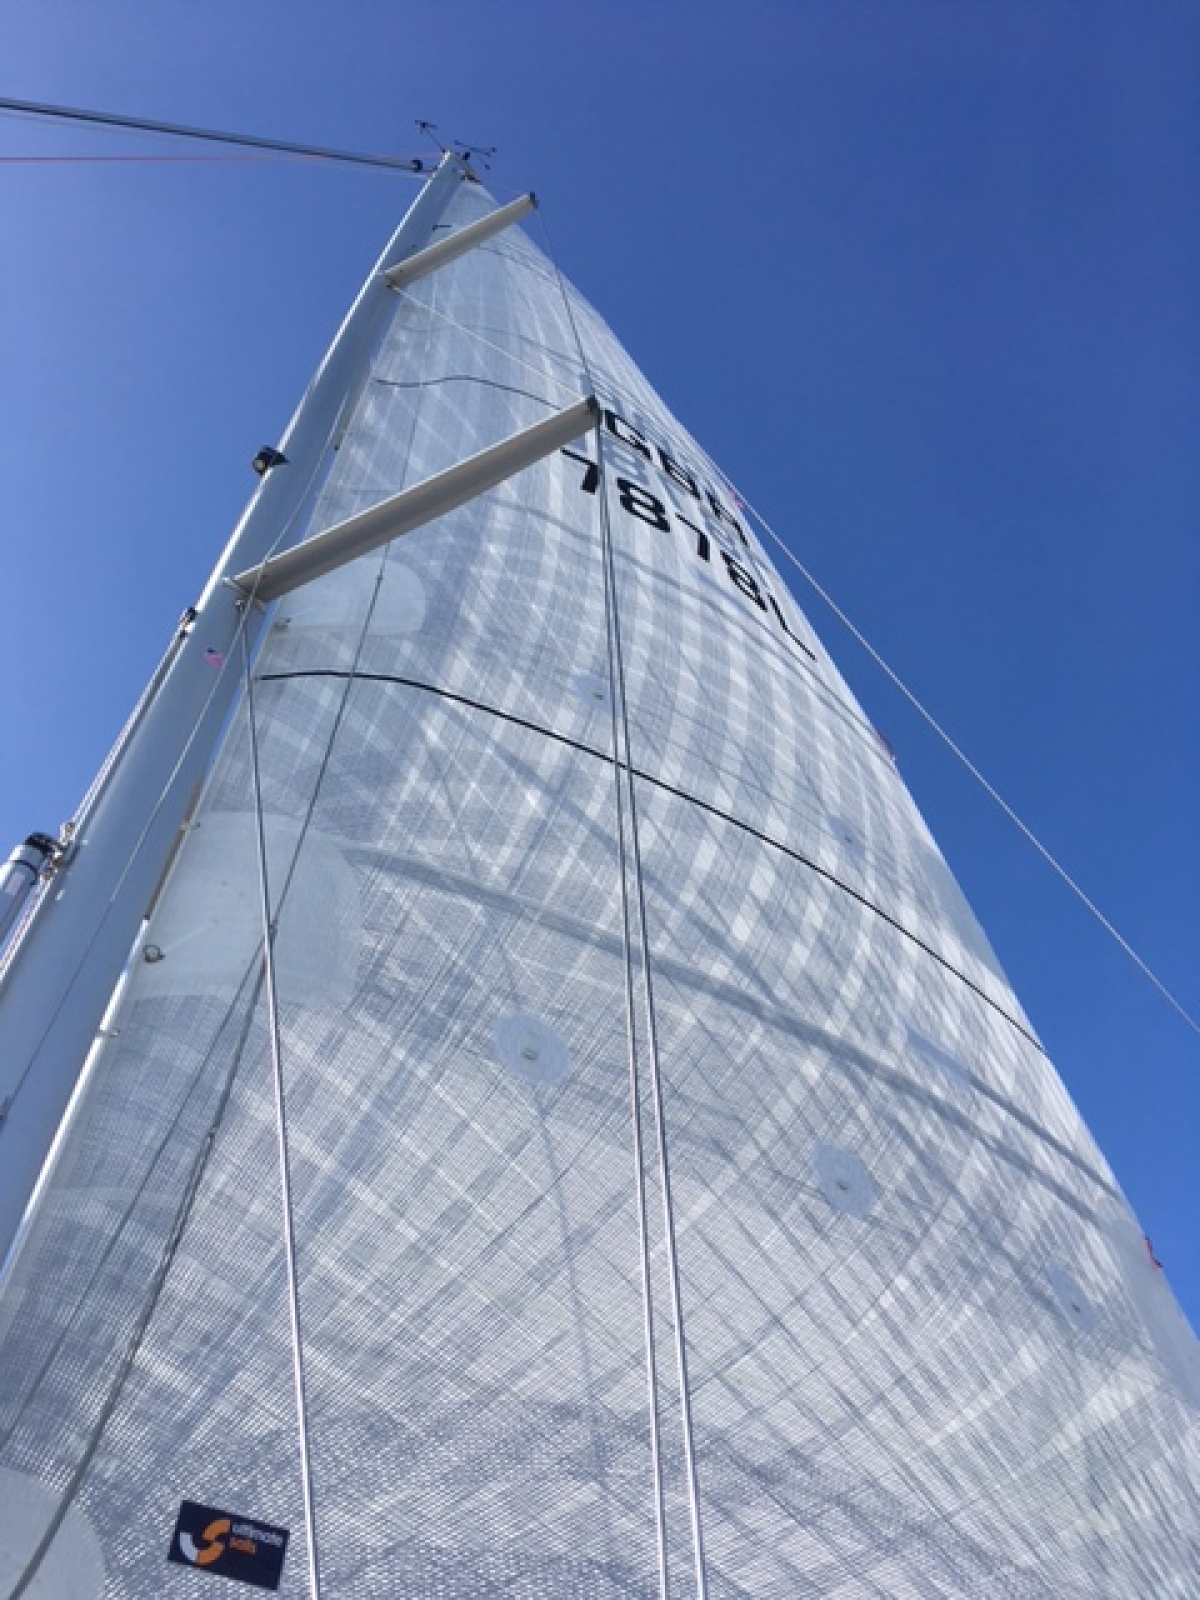 Be consistent with Ultimate Sails